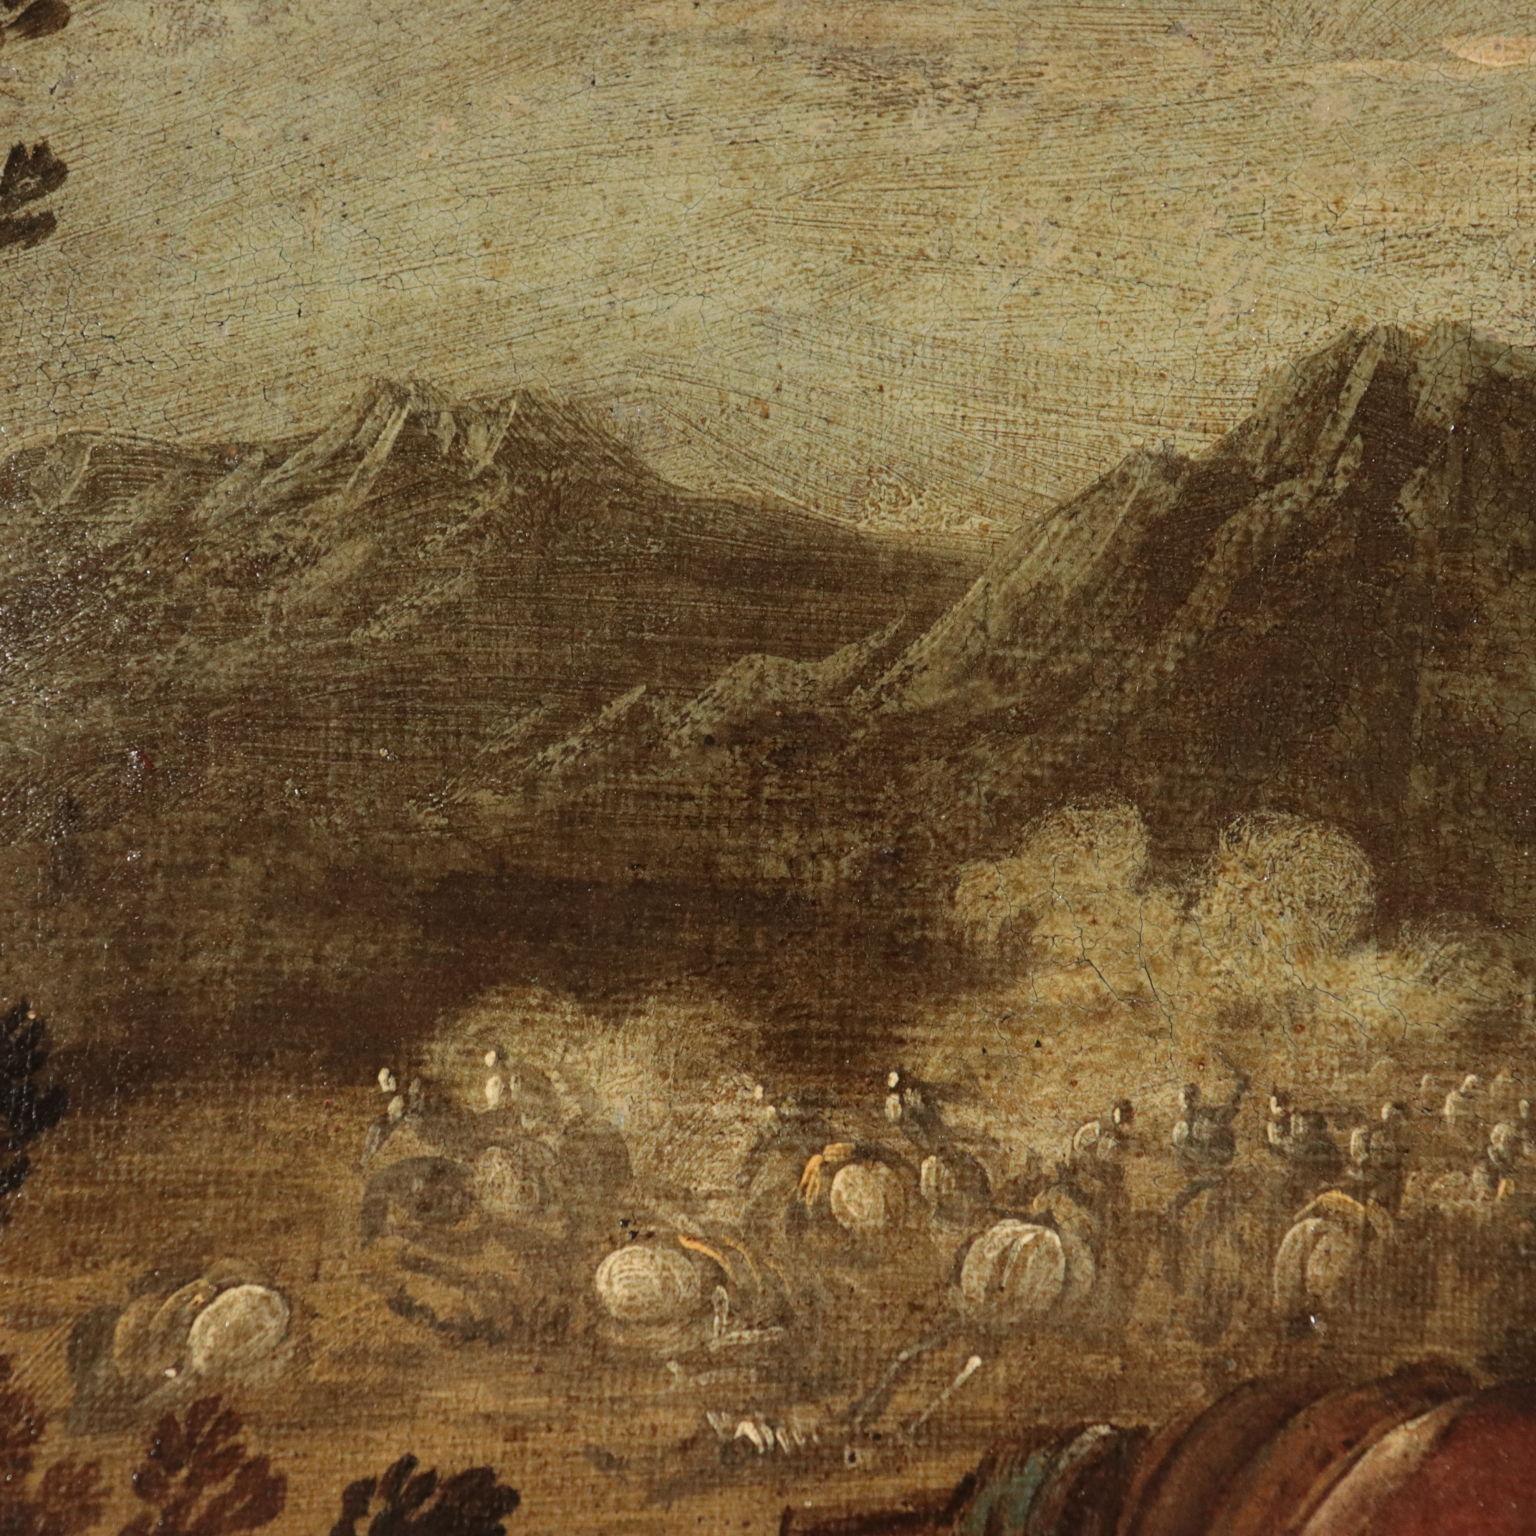 Oil on canvas. Neapolitan school. The scene focuses on a particular moment of the battle, represented on the left background as a cloud of dust that cover men fighting in a barren mountain landscape; the right side is occupied by the drama of some